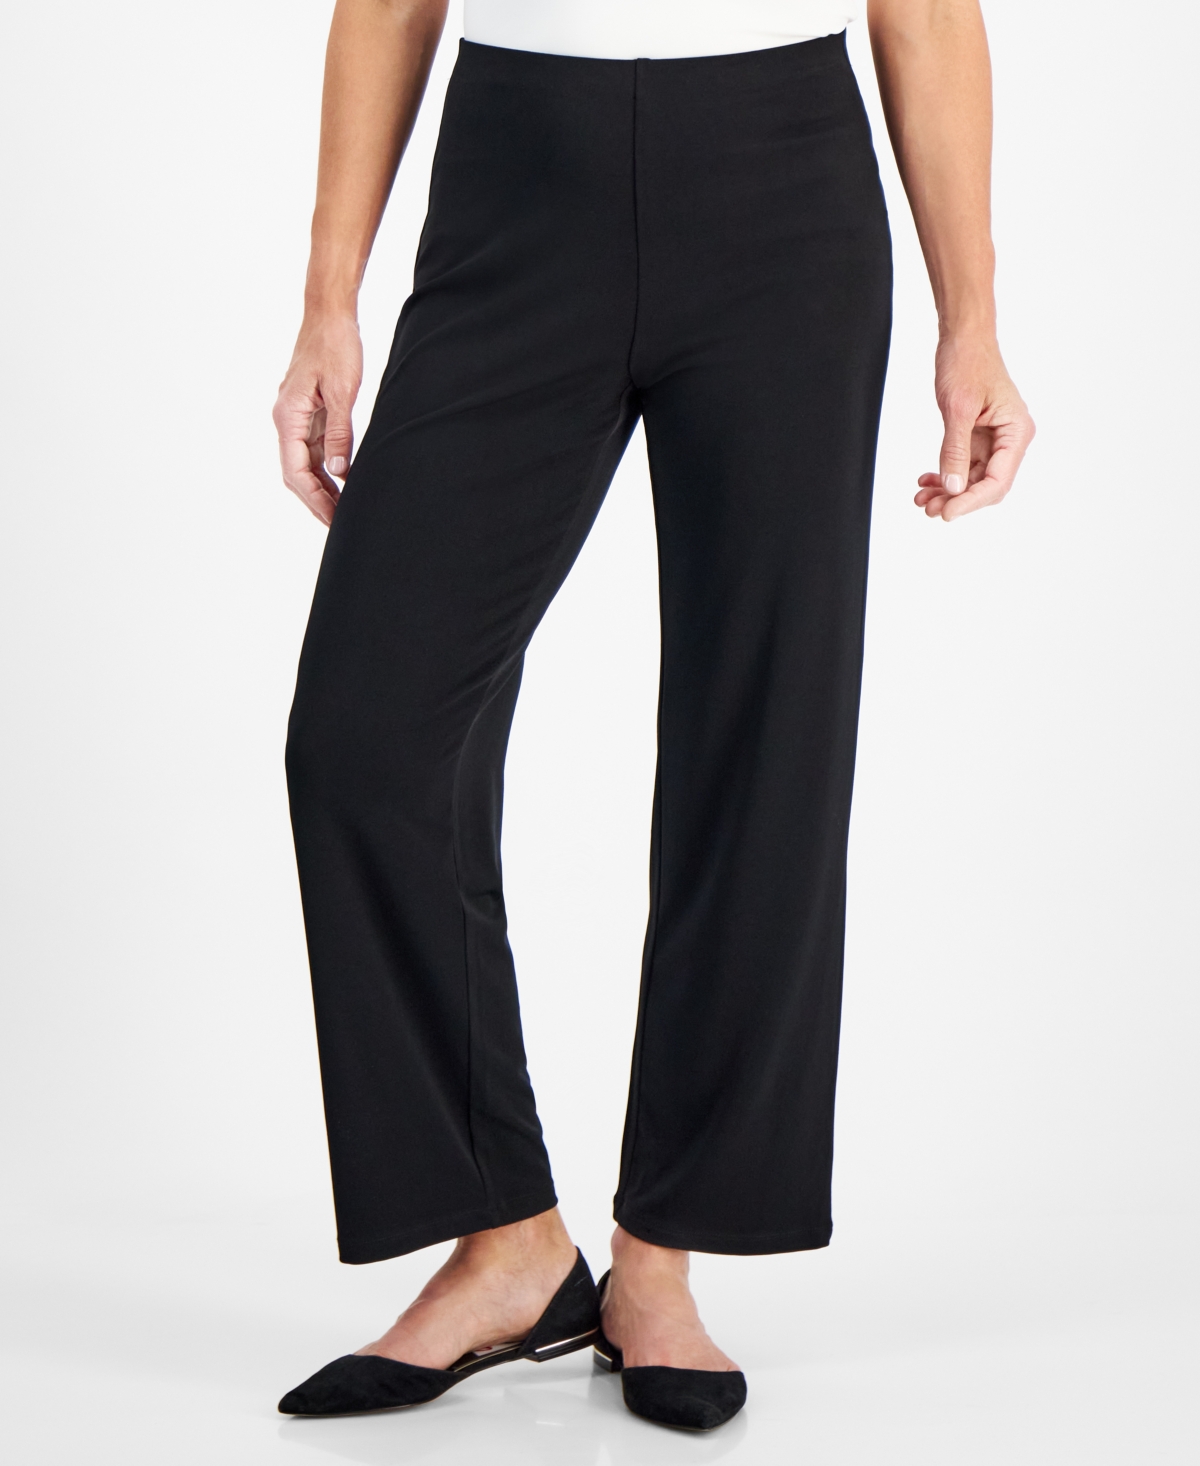 Petites Knit Pull-On Pants, Created for Macy's - Intrepid Blue